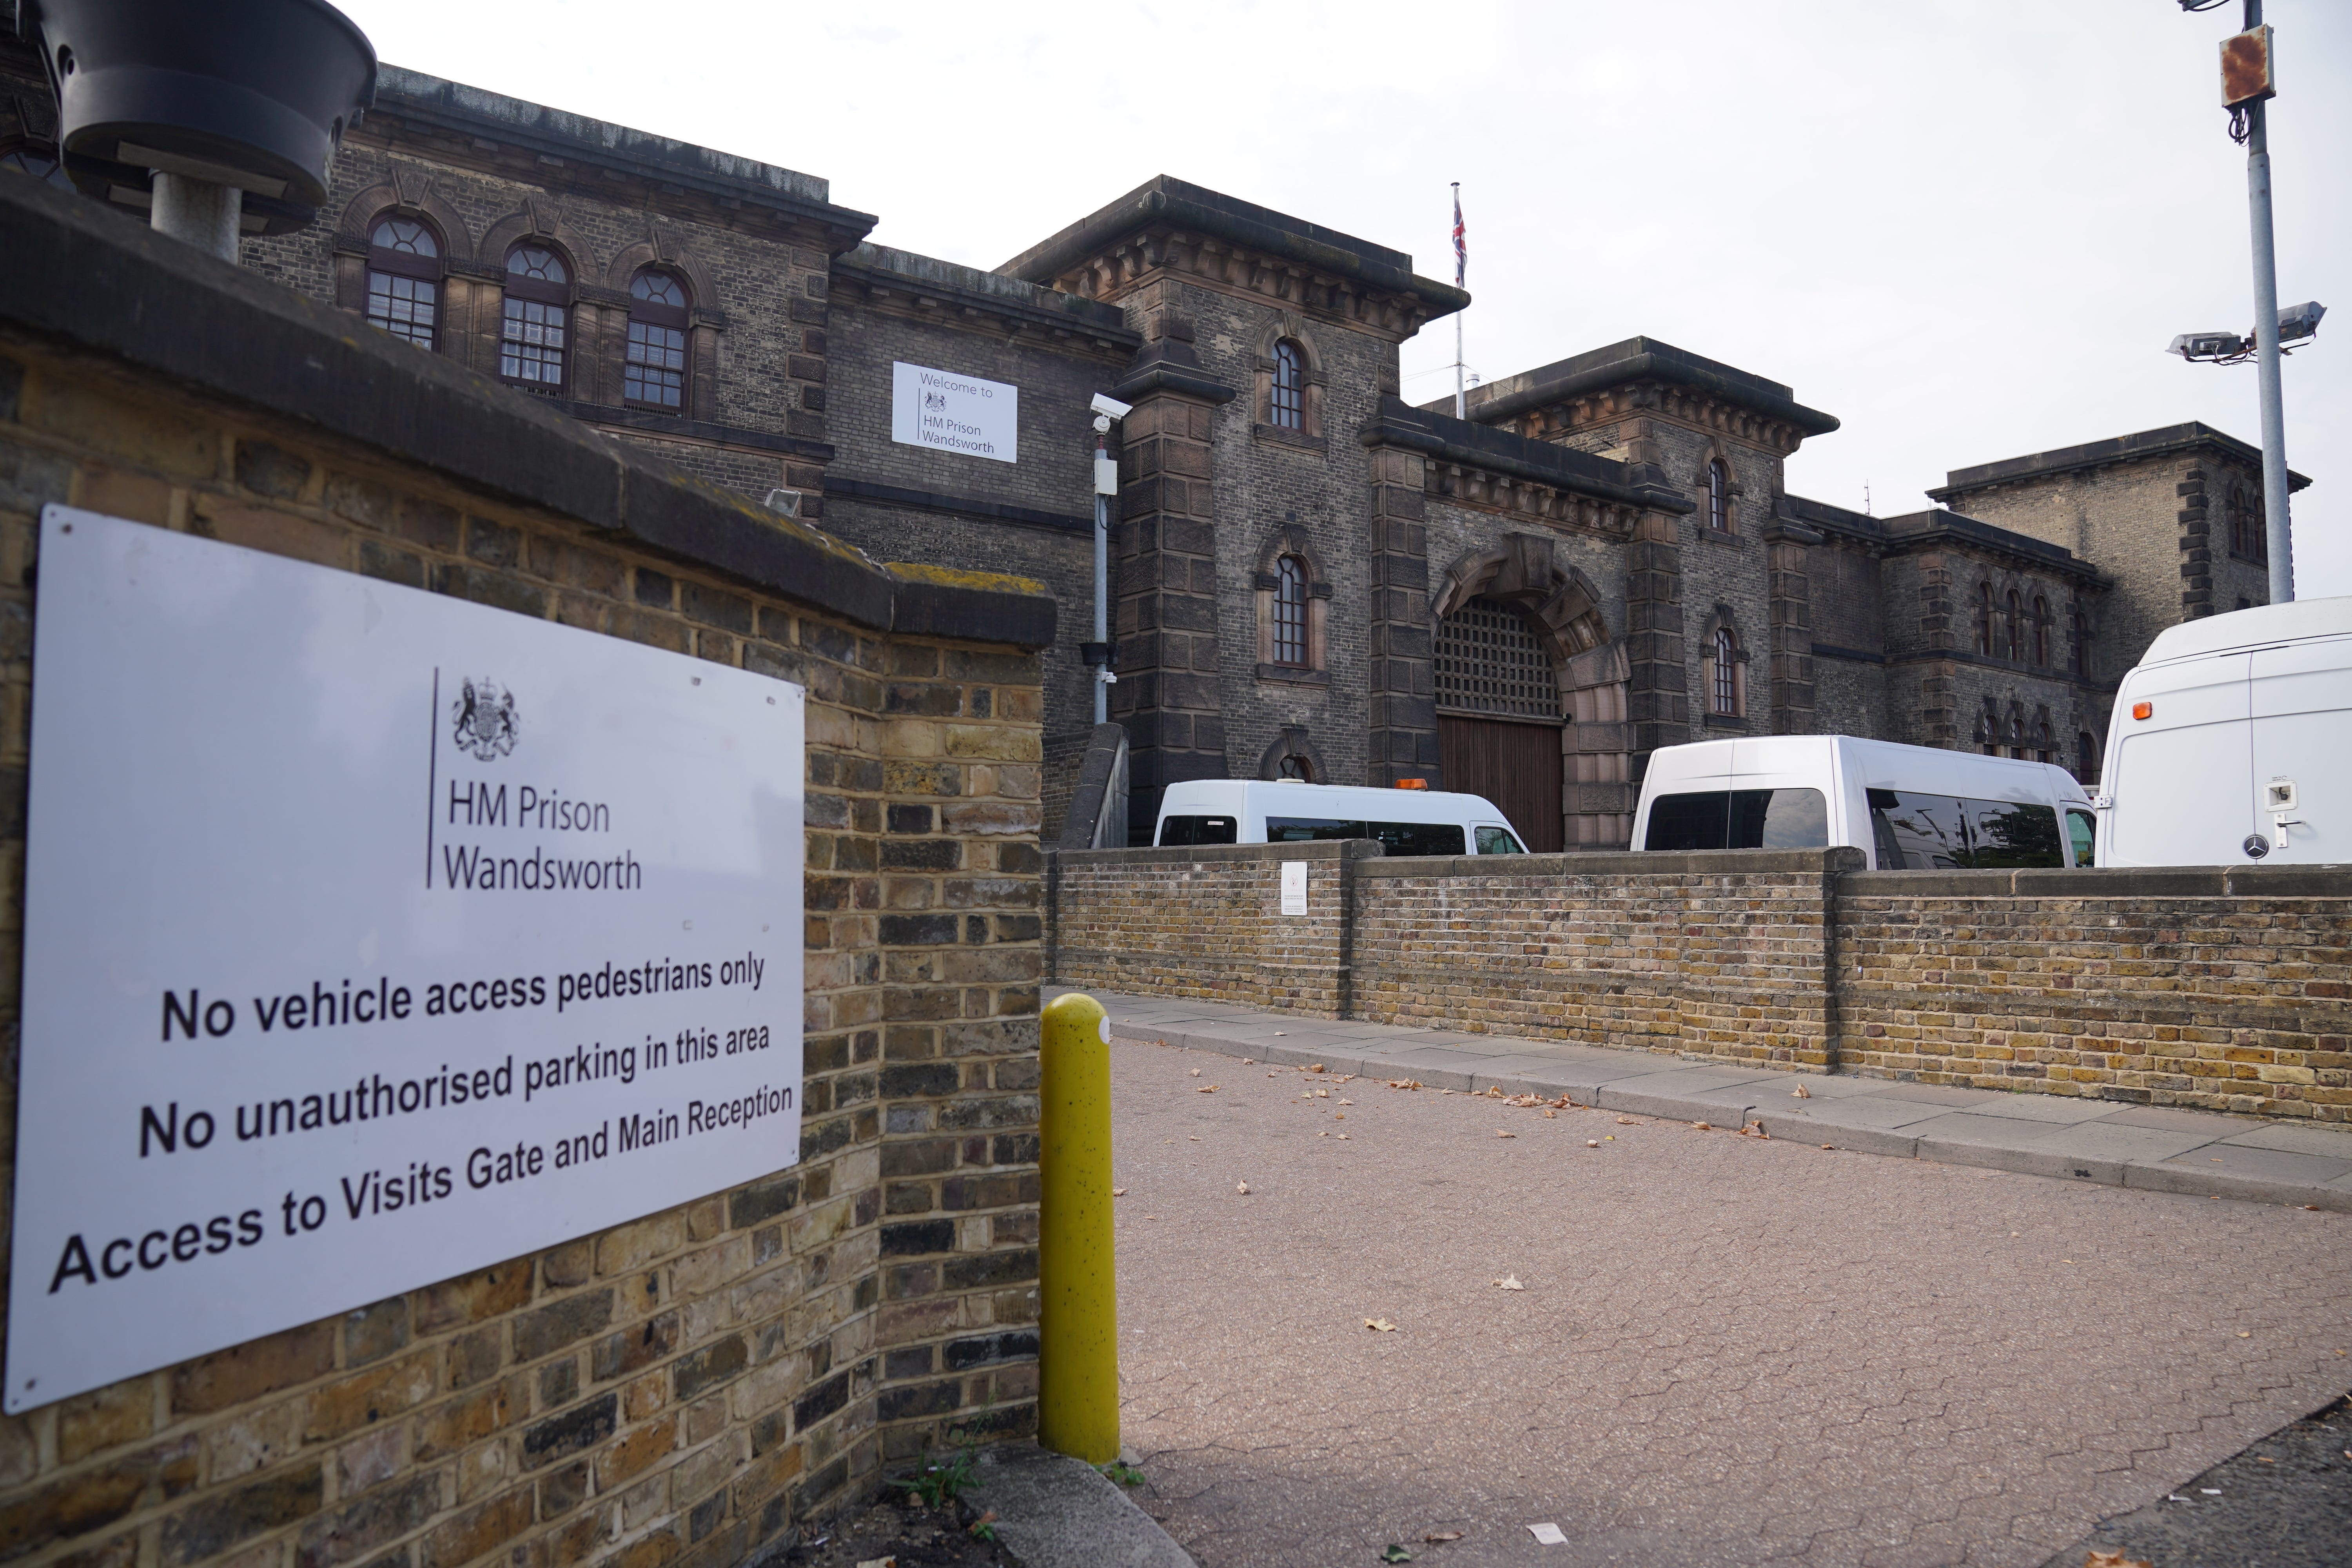 A man has been stabbed at HMP Wandsworth, the Met Police has said (Lucy North/PA)